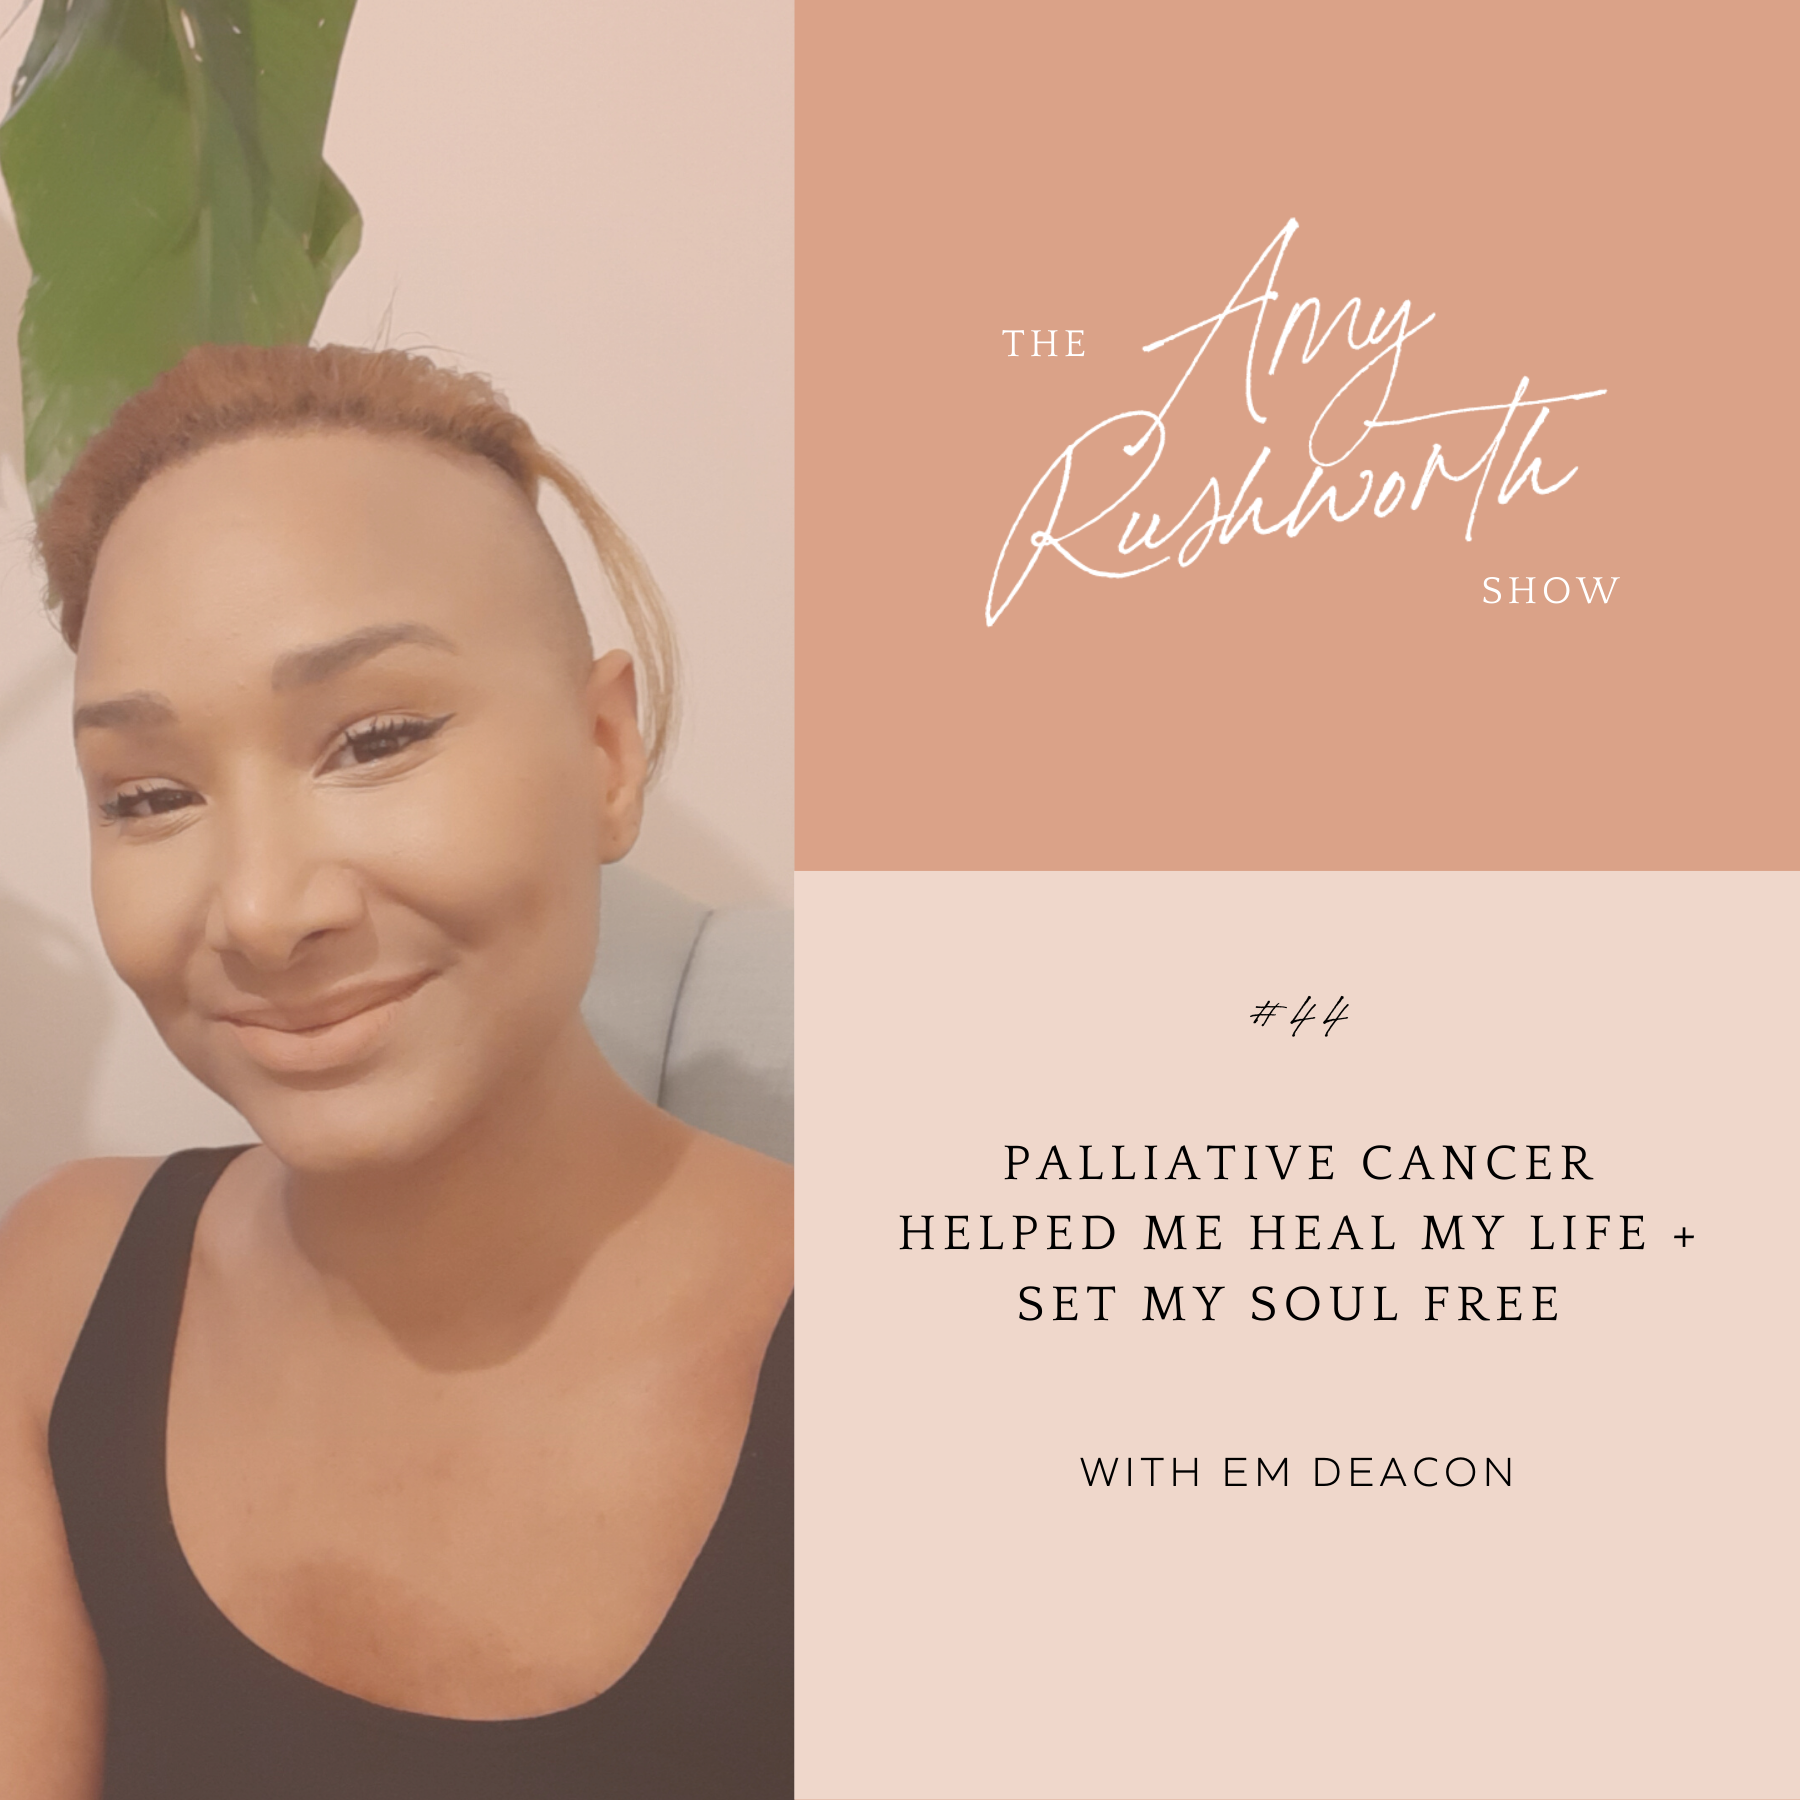 Episode 44: Palliative Cancer Helped Me Heal My Life and Set My Soul Free